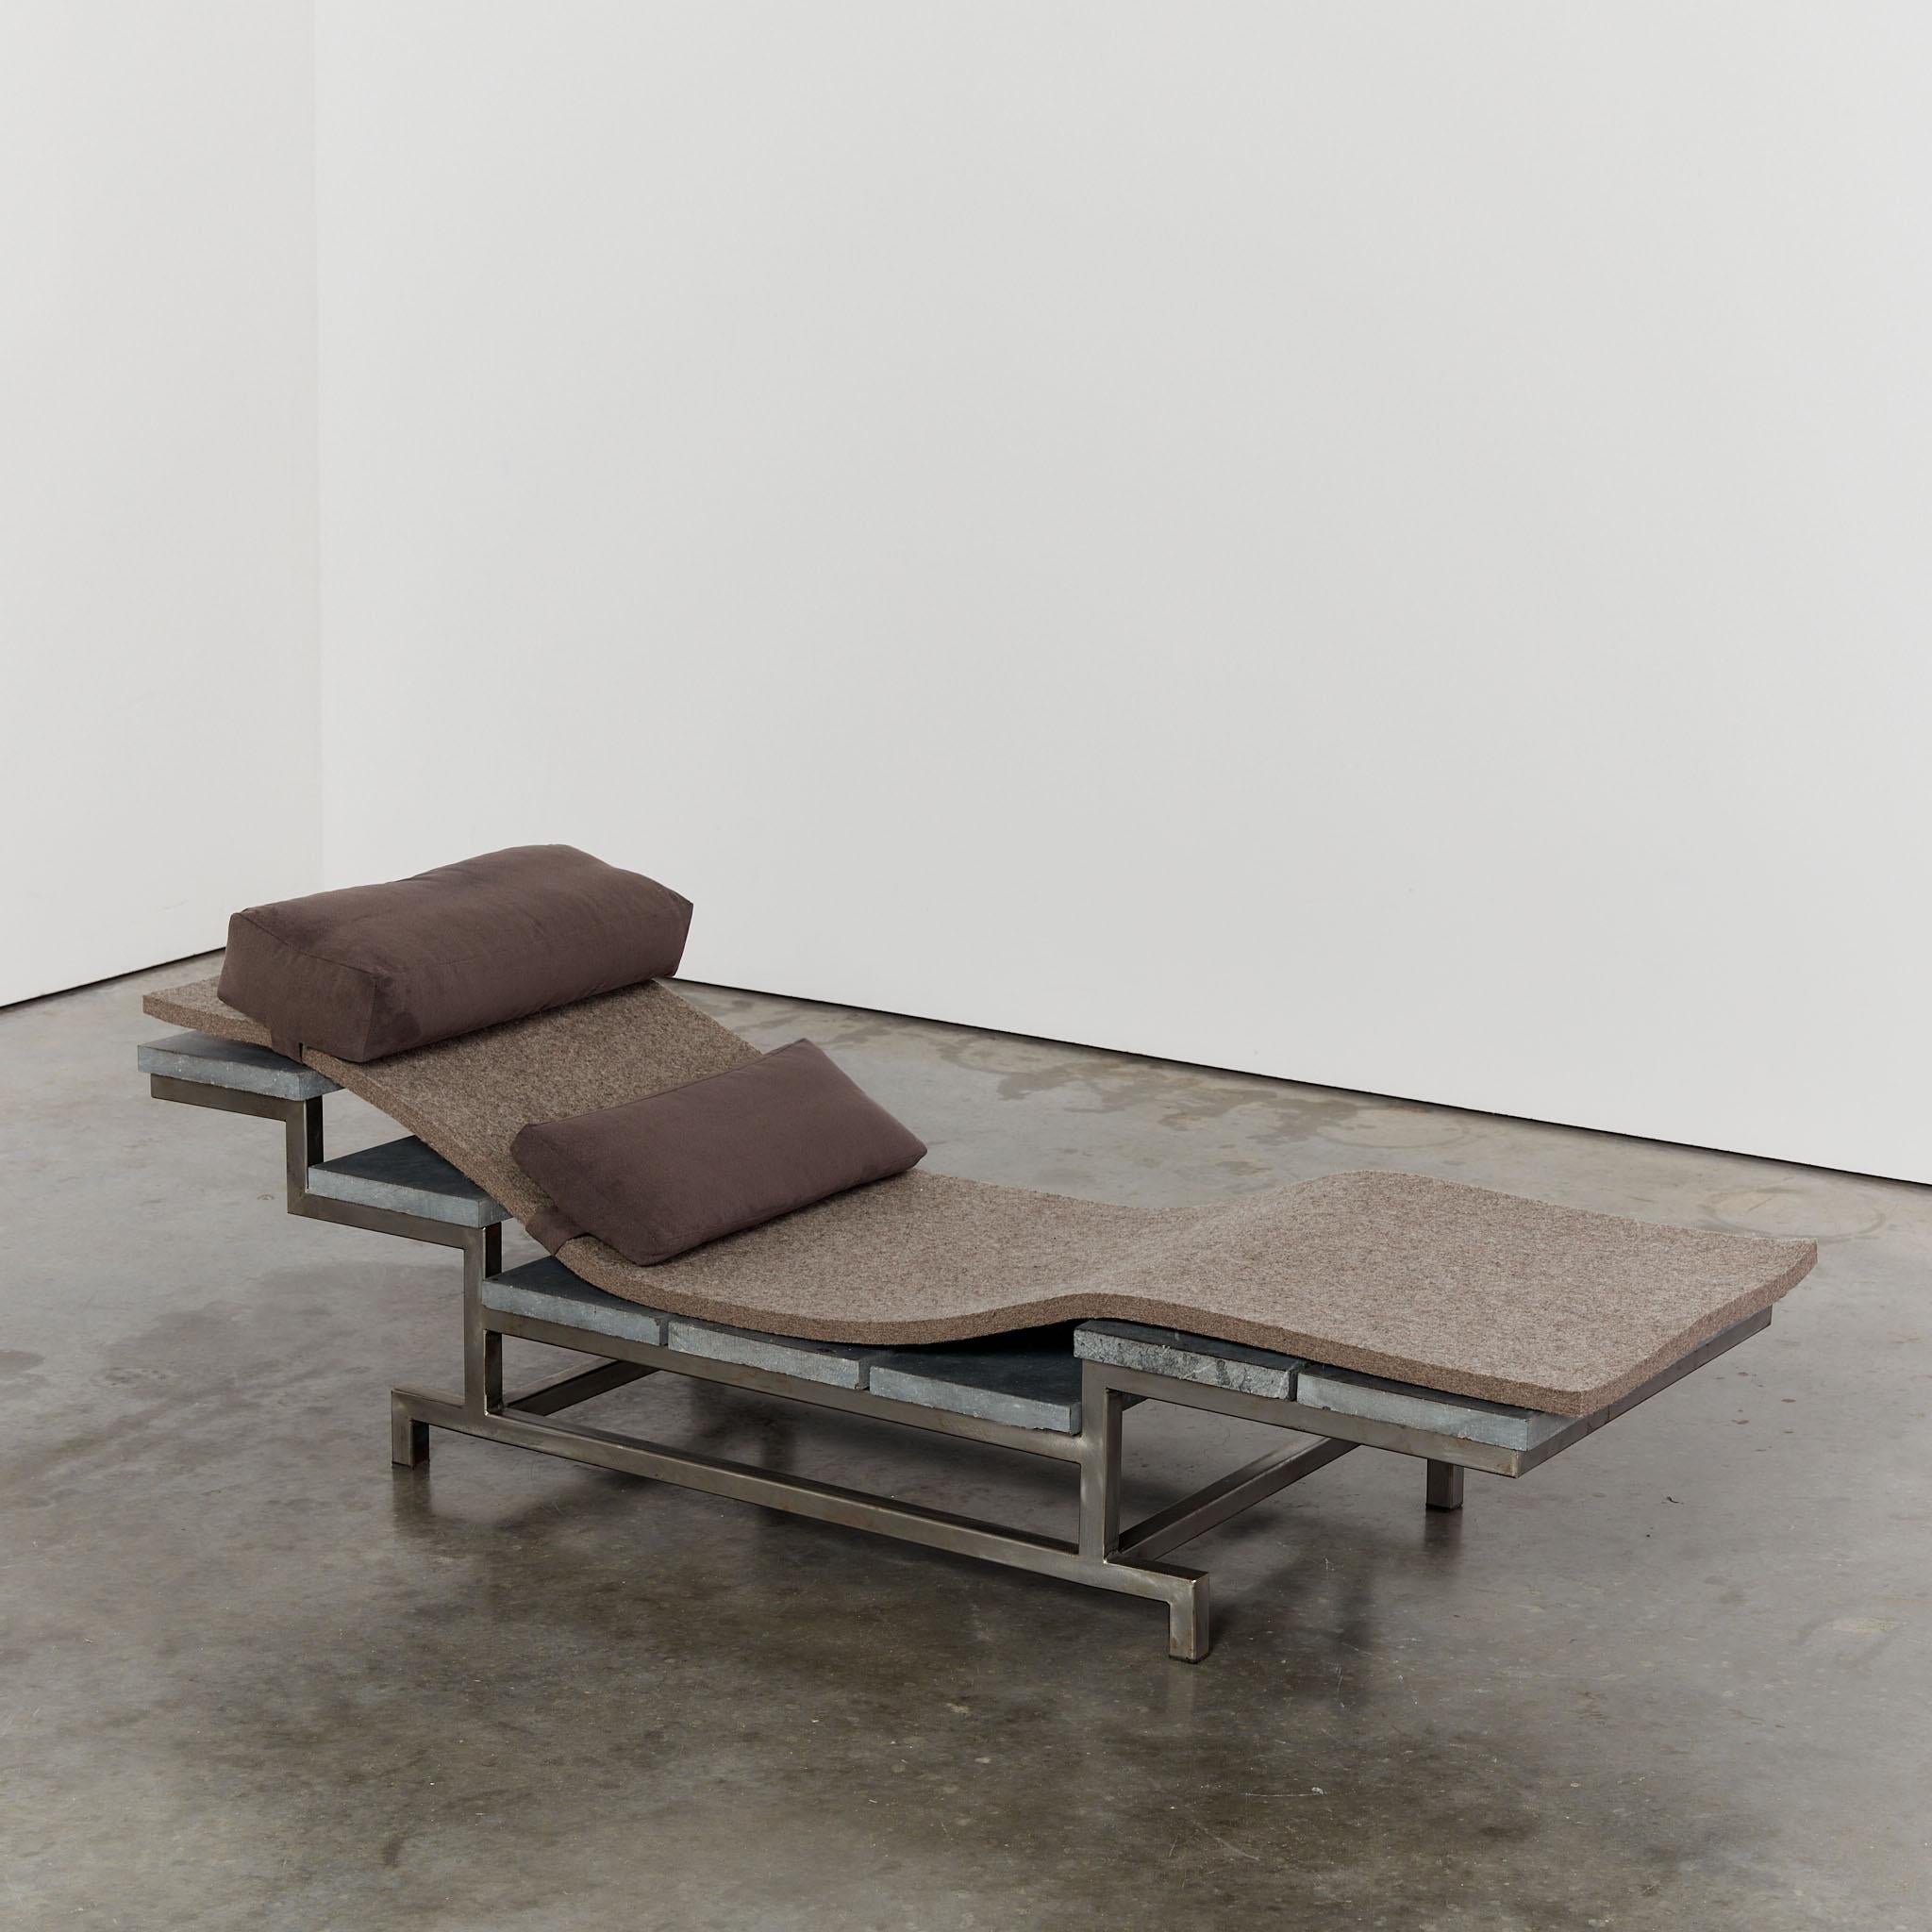 Marble stainless steel and felt daybed by Christoph Siebrasse For Sale 5